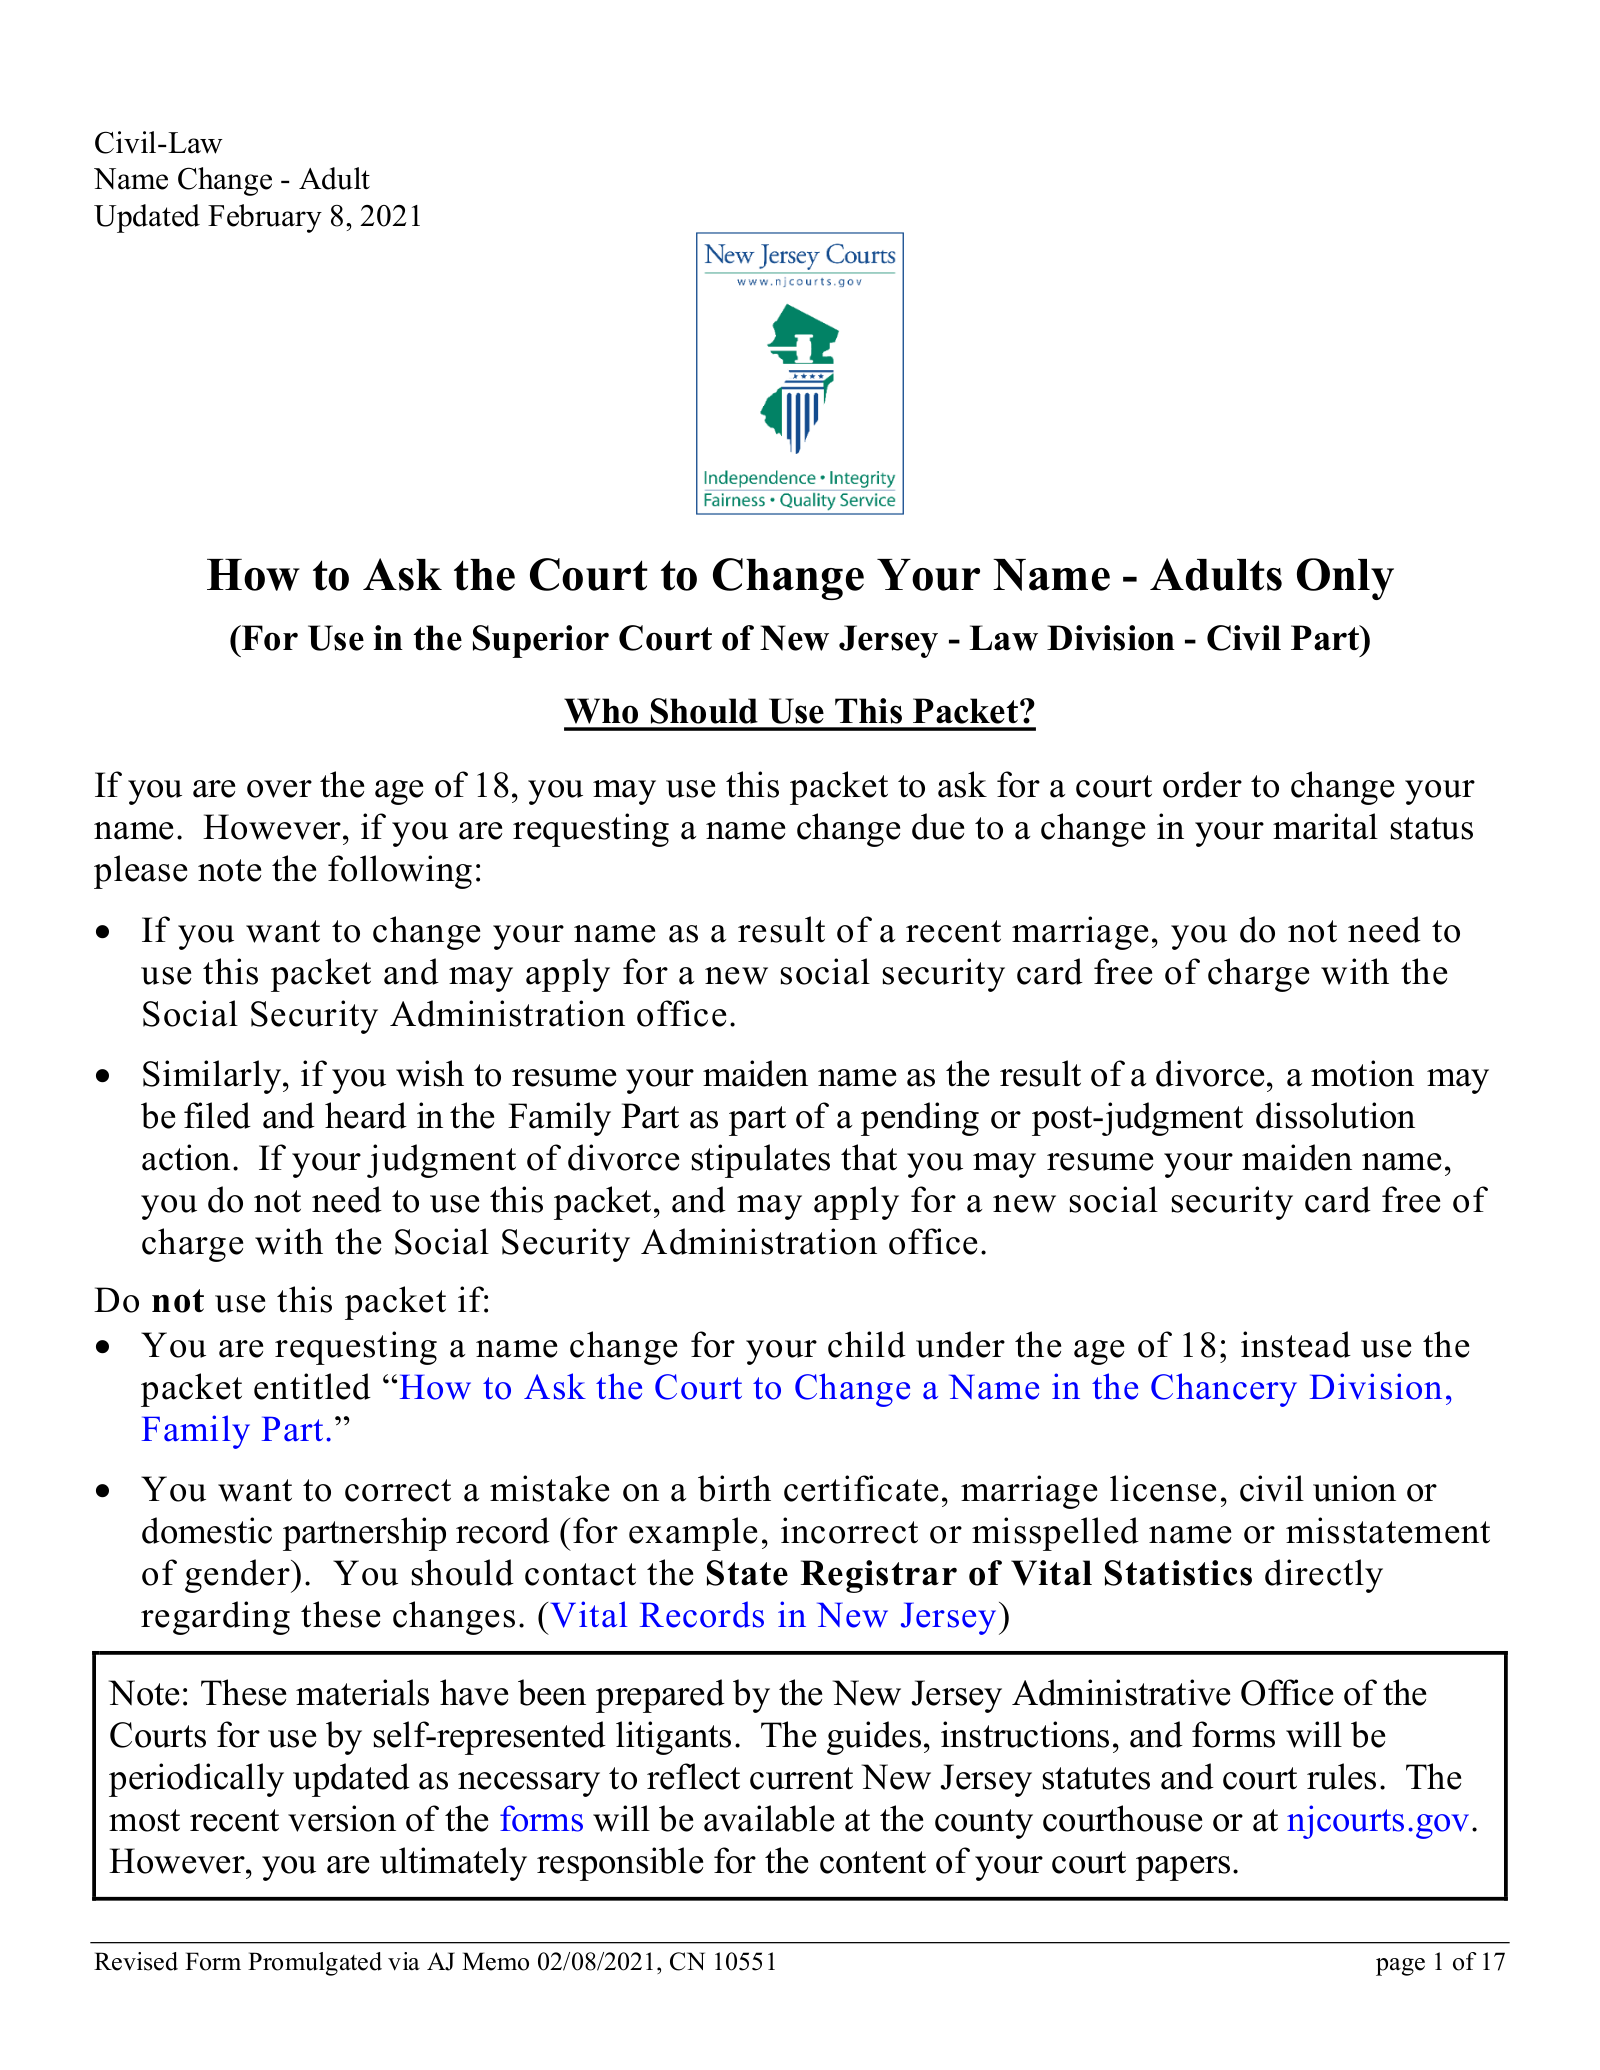 New Jersey Name Change Forms | Verified Complaint CN 10551